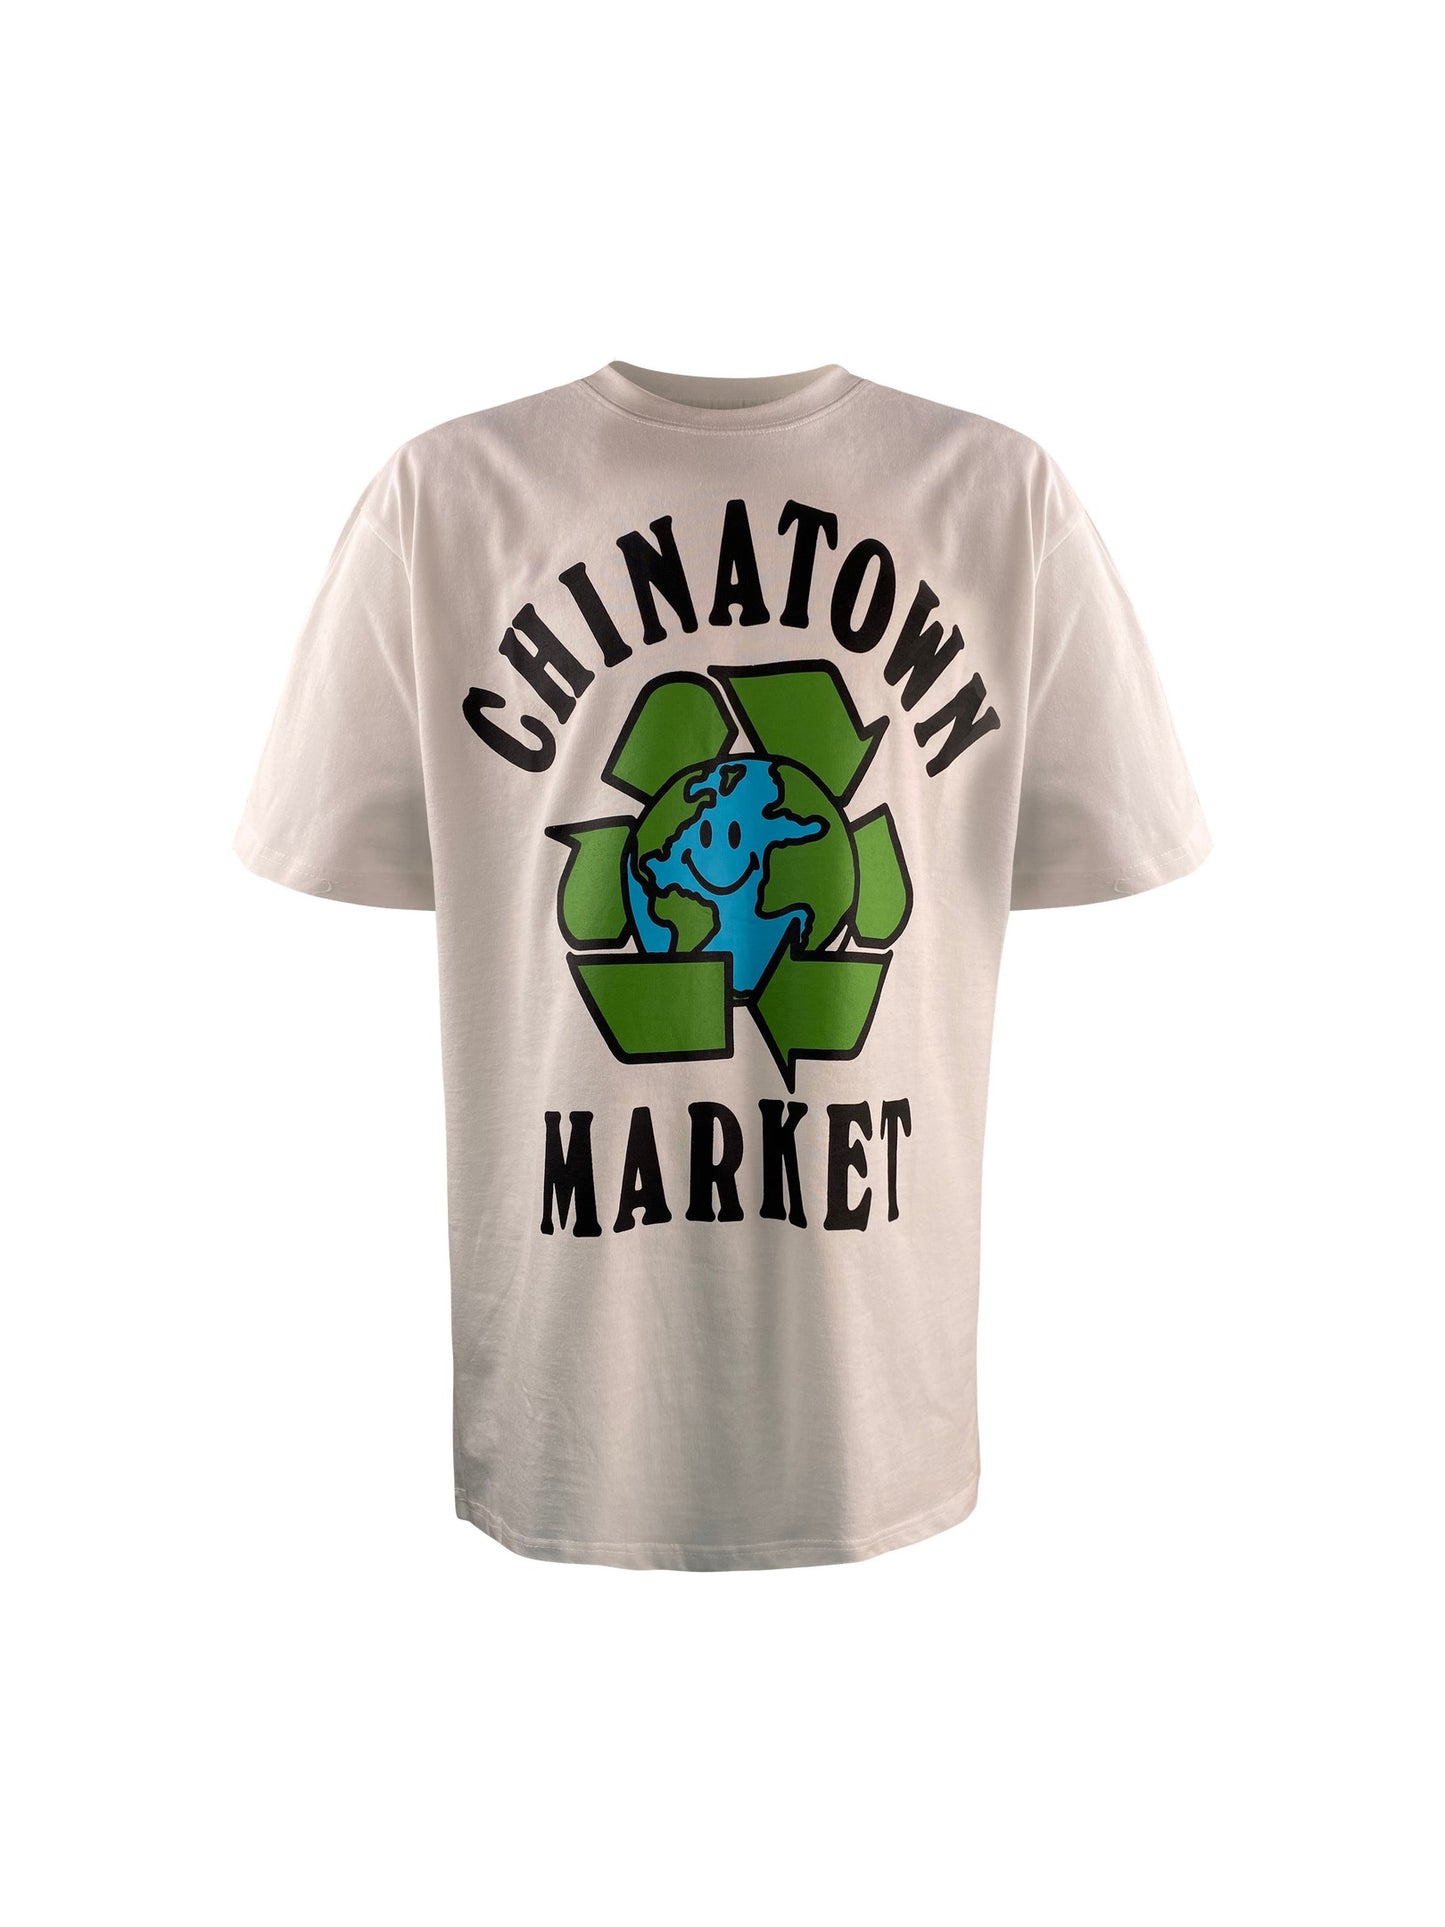 Chinatown Market Tee “Recycle Global“ -white